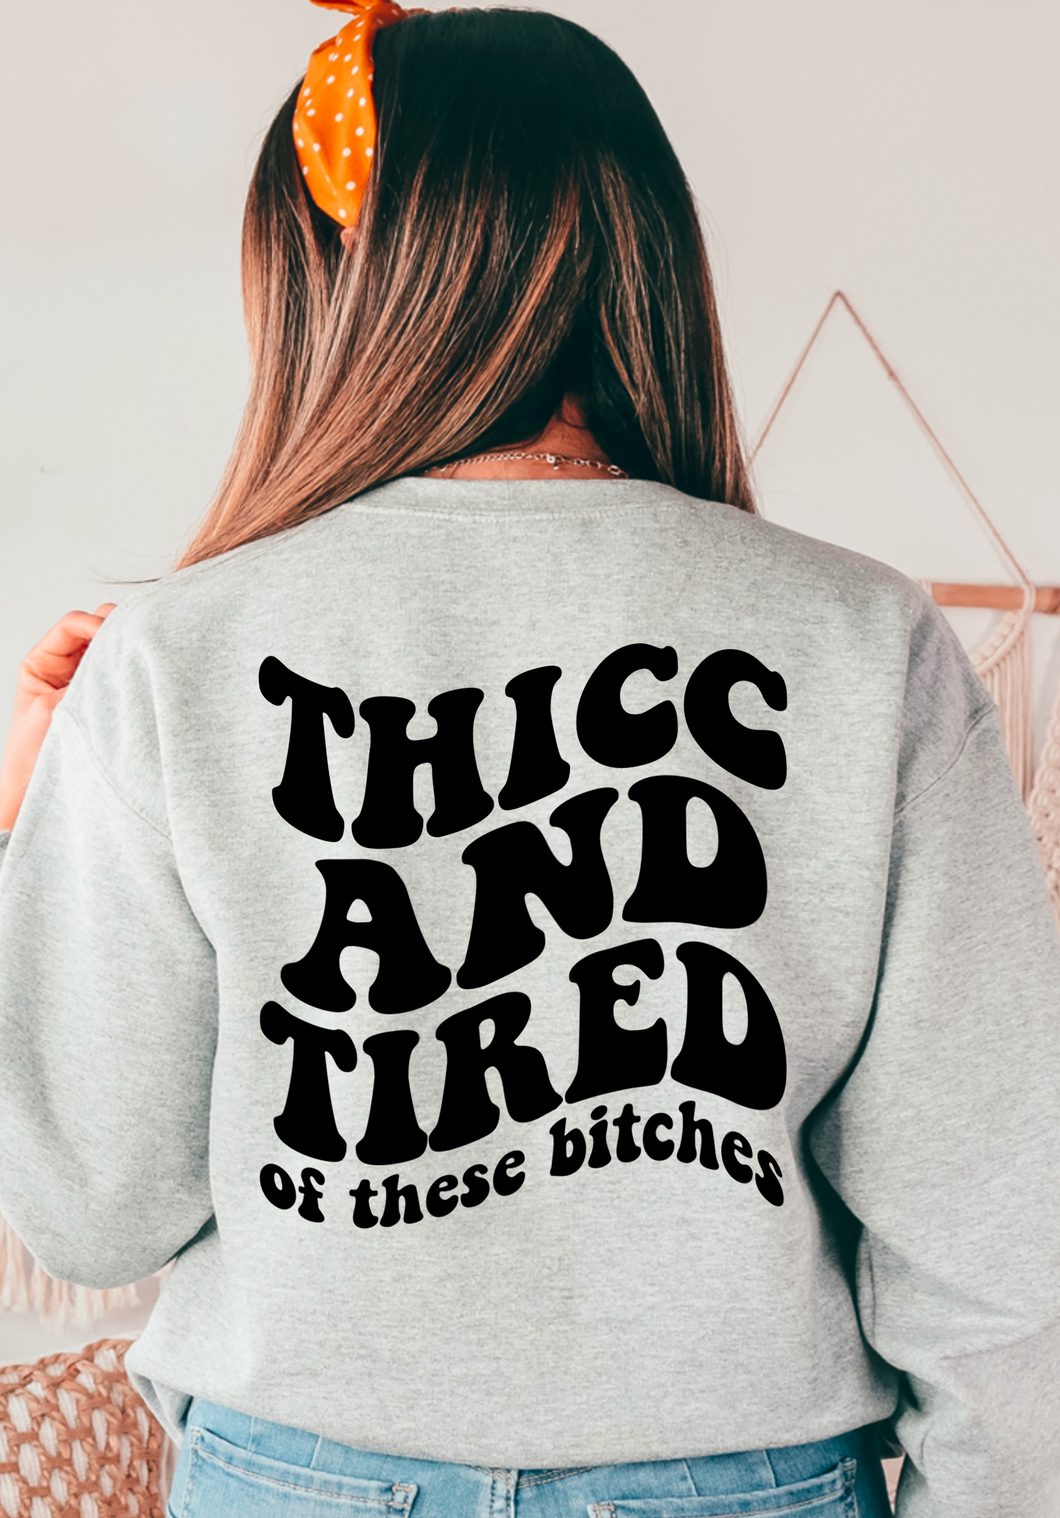 Thicc and tired of these bitches